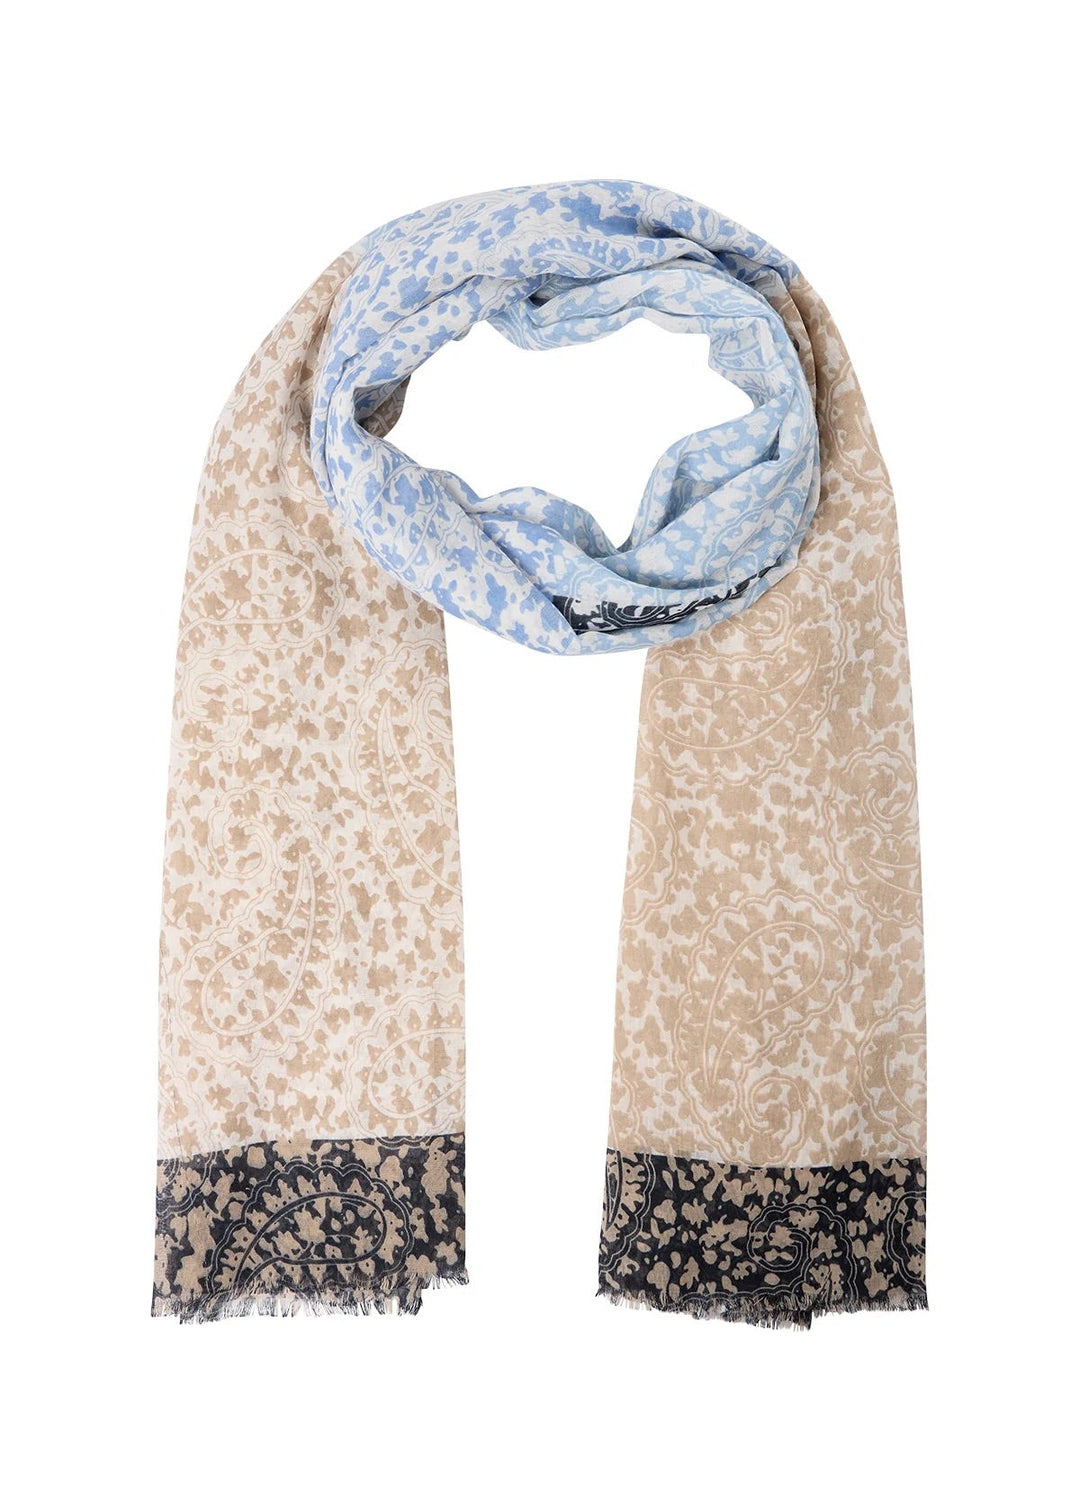 Soya Concept Denezia Scarf In Blue Multi - Crabtree Cottage